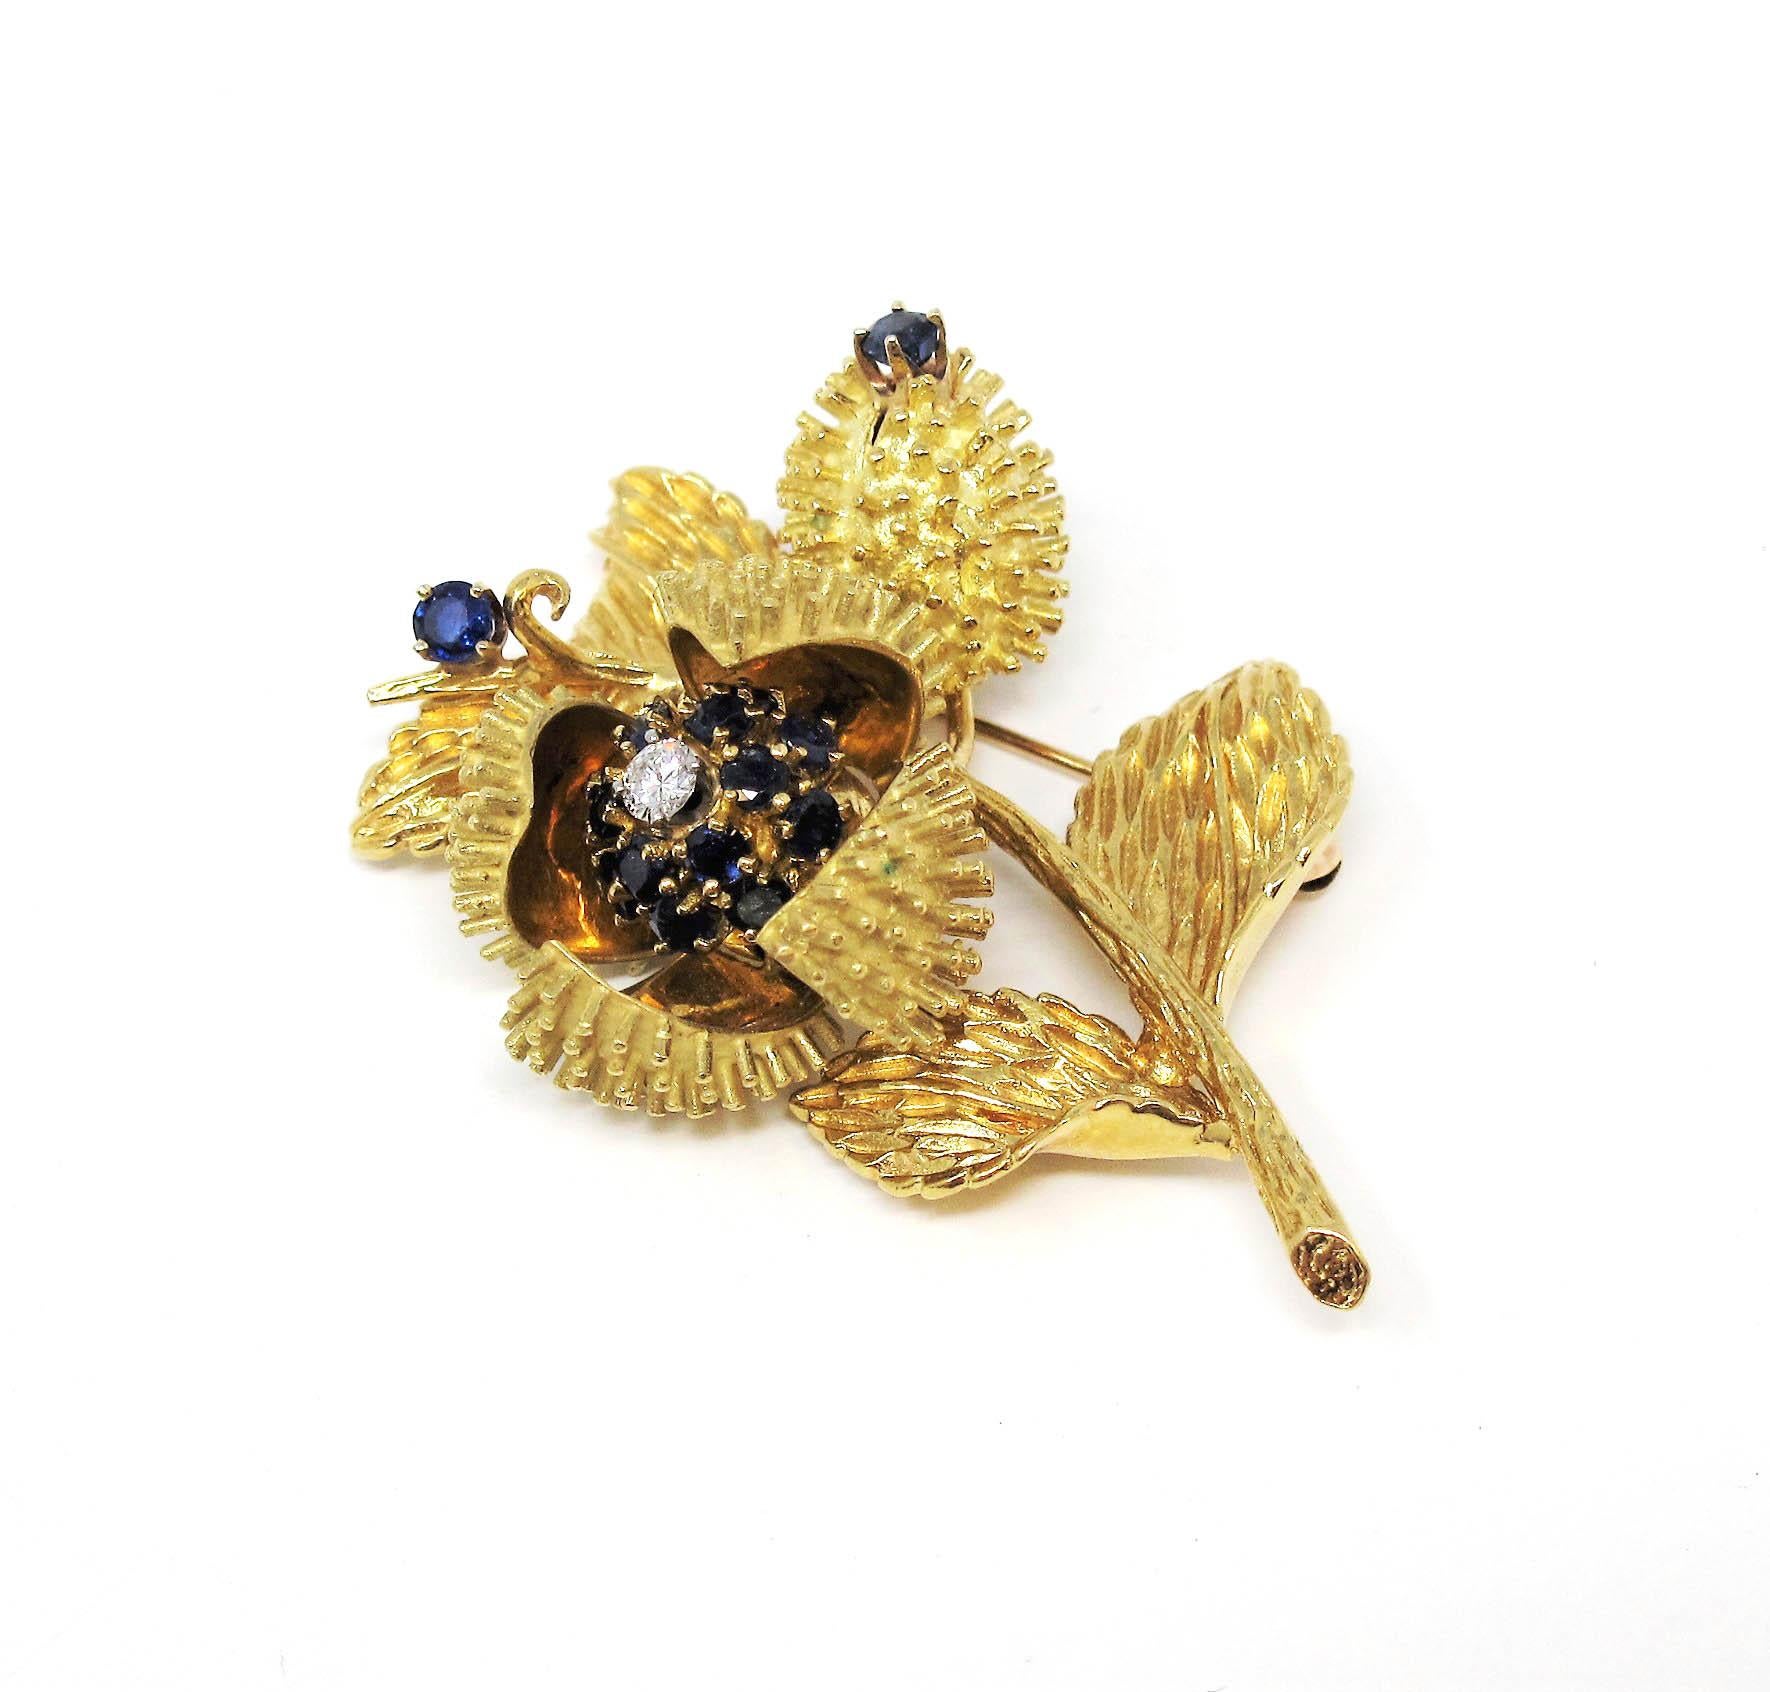 This exquisite vintage sapphire and diamond chestnut brooch by Tiffany & Co. is a true work of art. Featuring an intricate botanical design, incredible attention to detail and a 